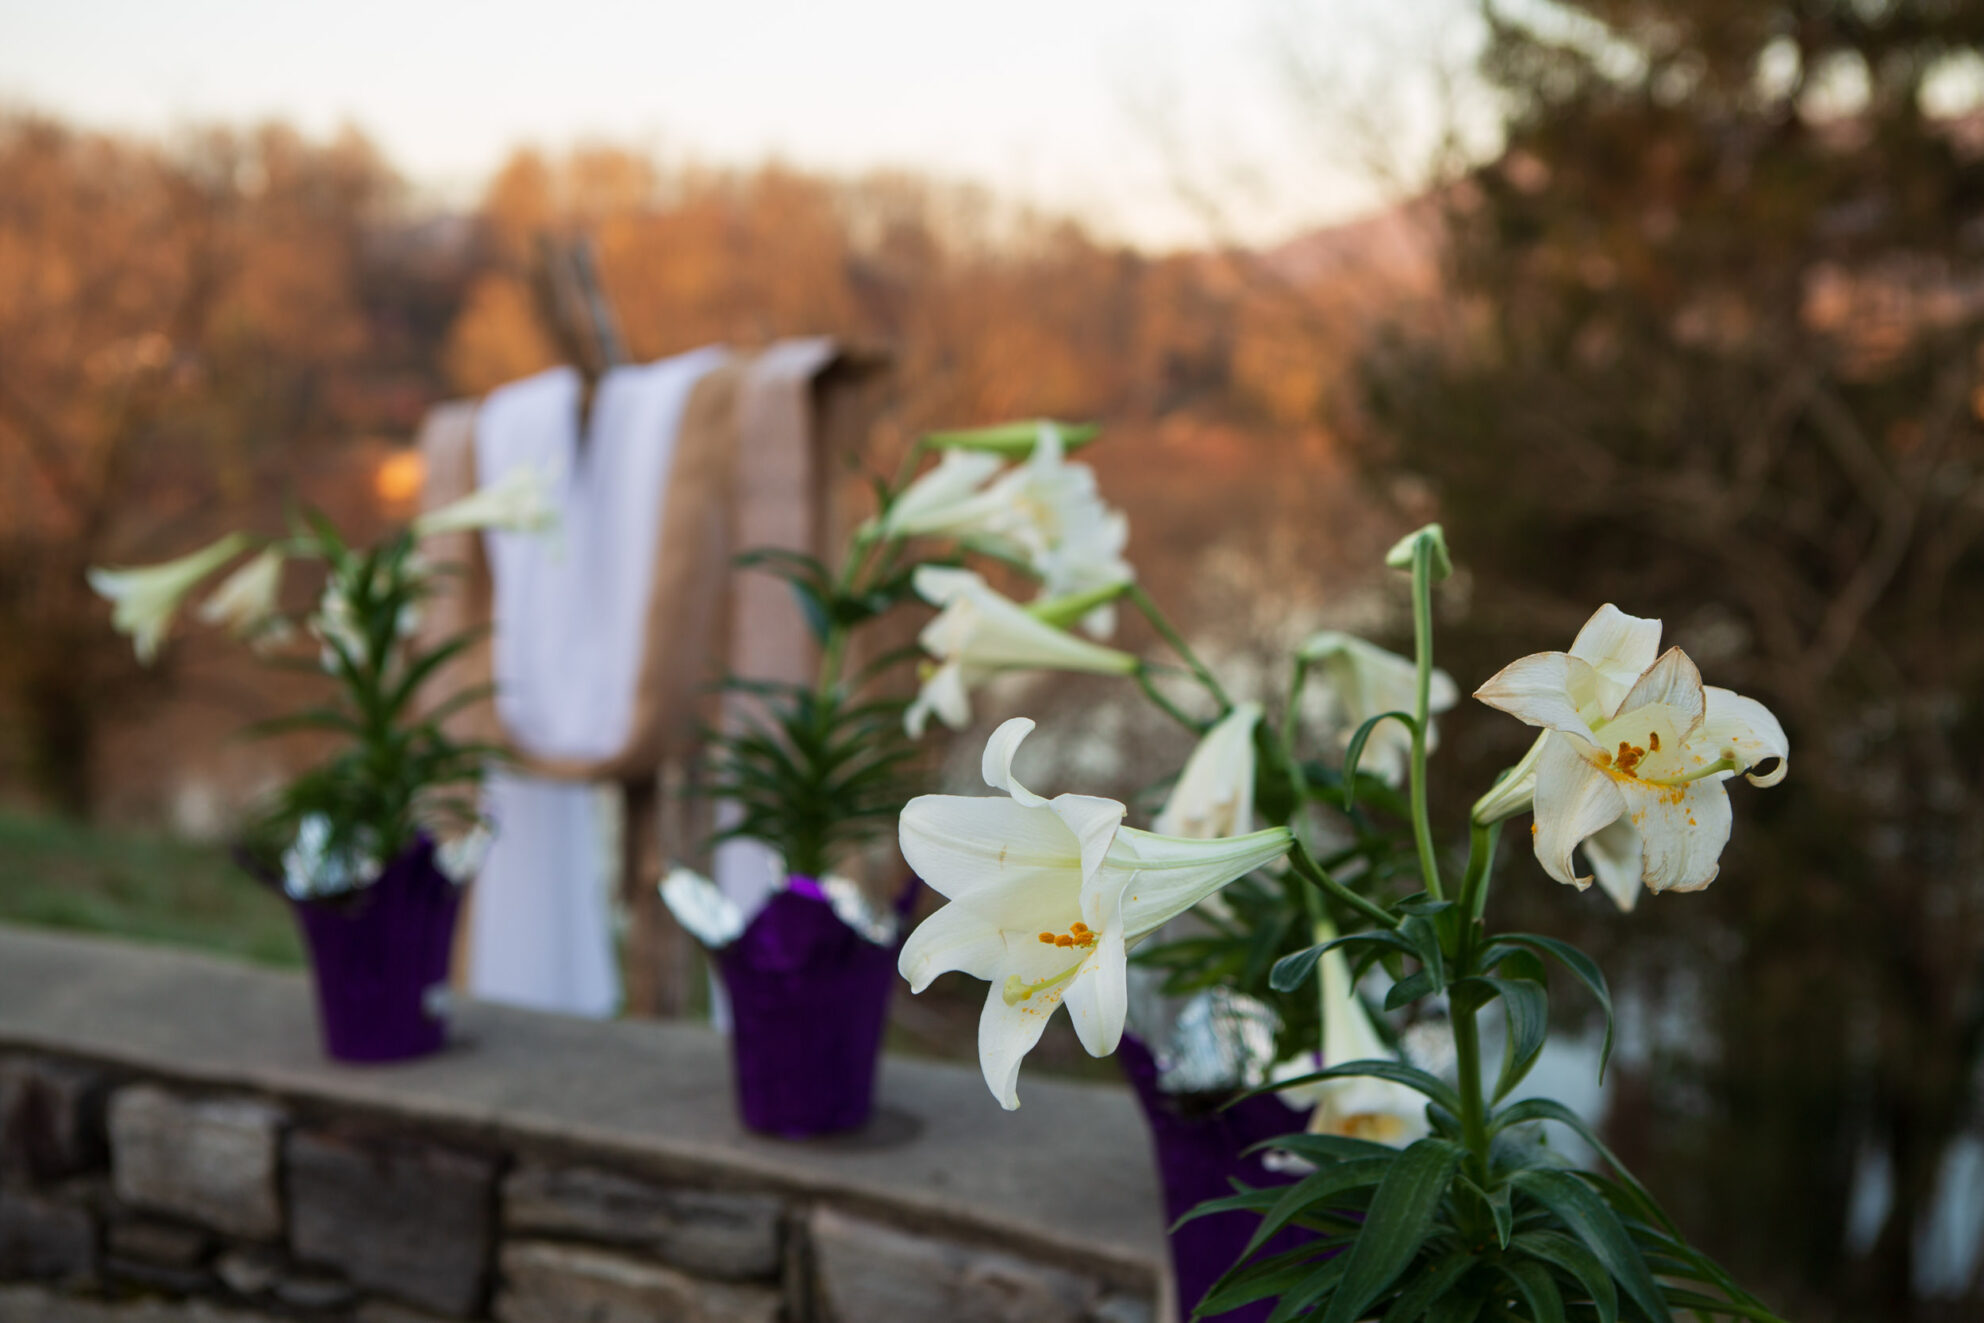 Lilies at the outdoor Easter Sunrise Service